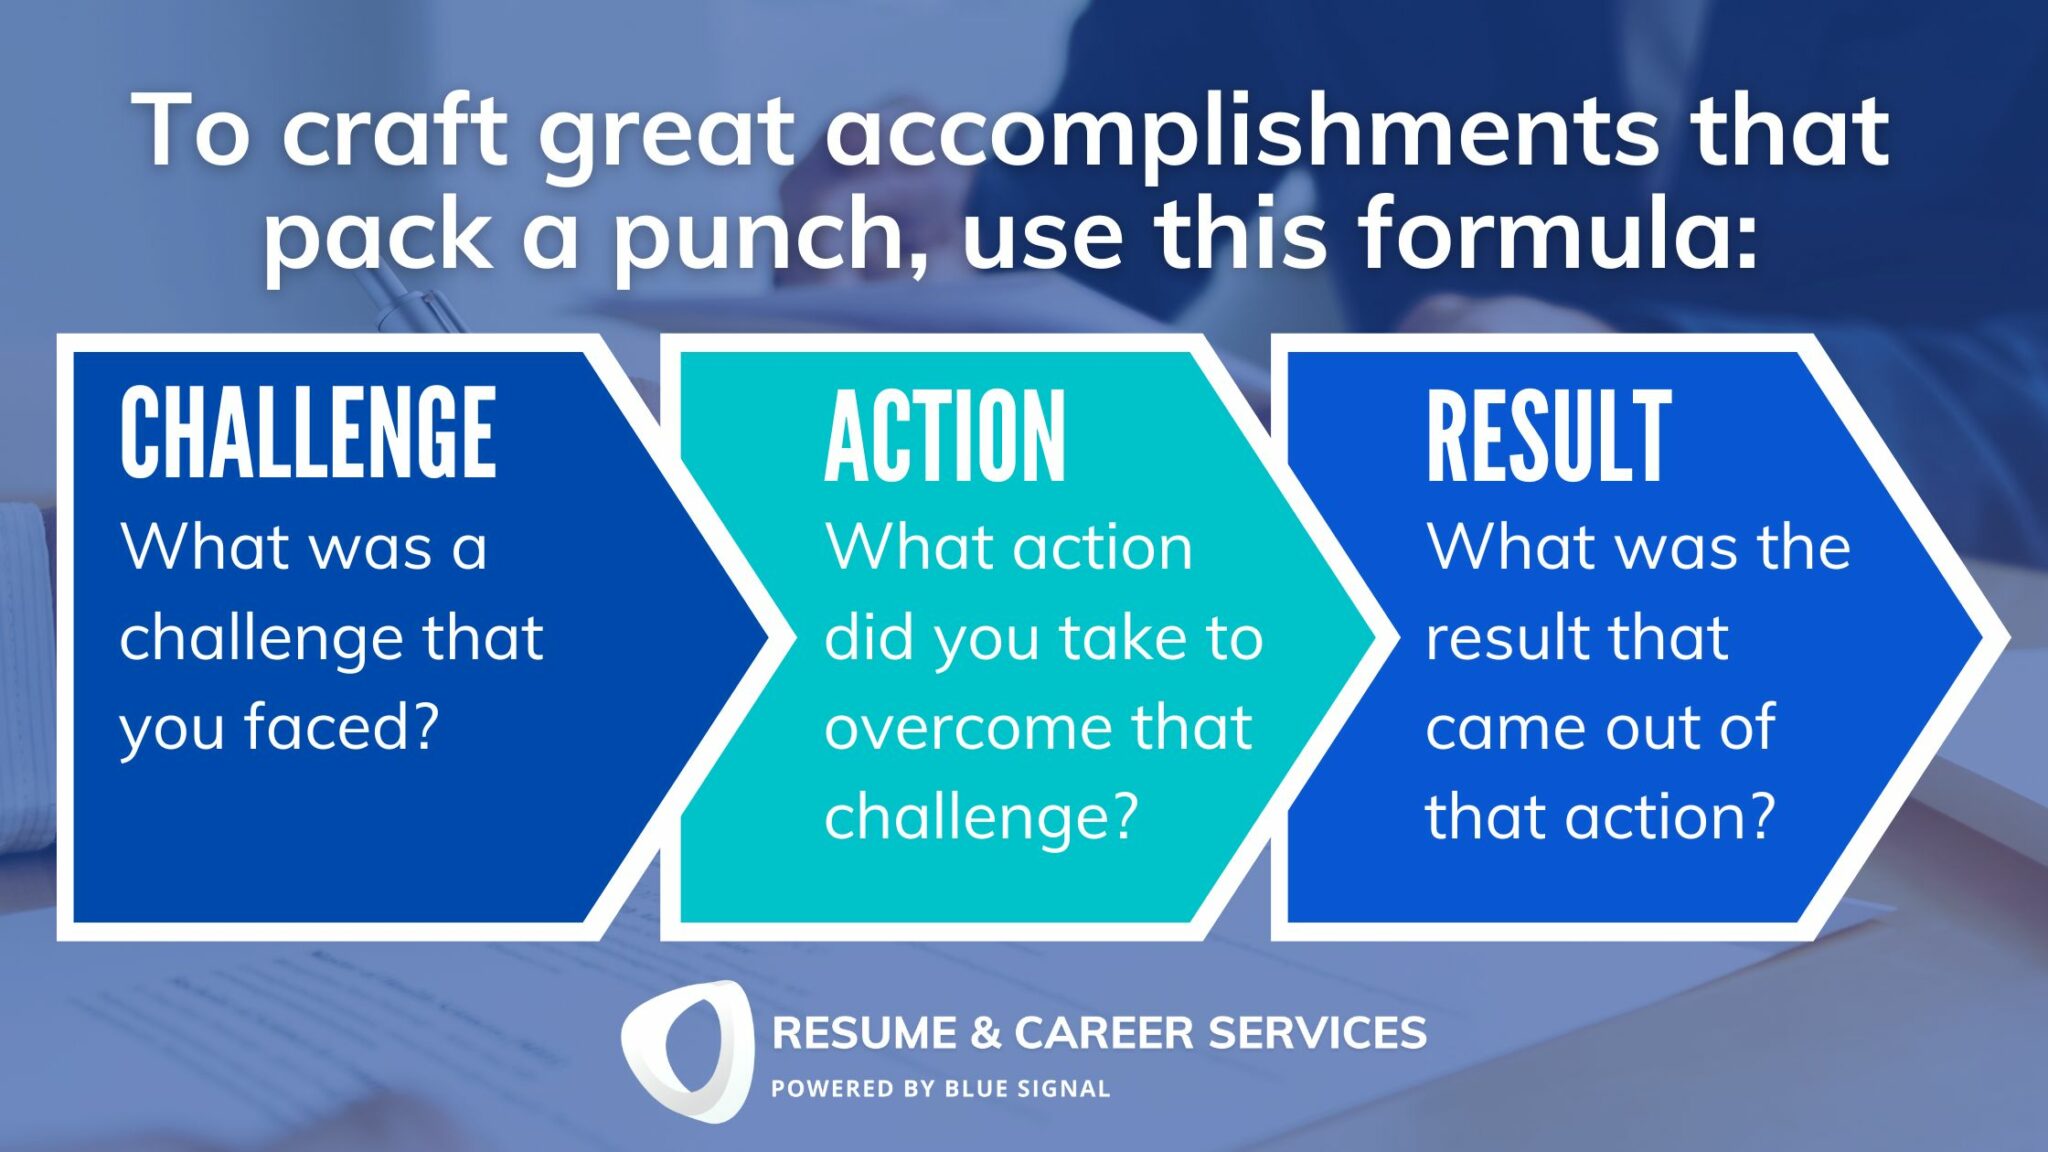 September Update Your Resume Month Blog Graphics